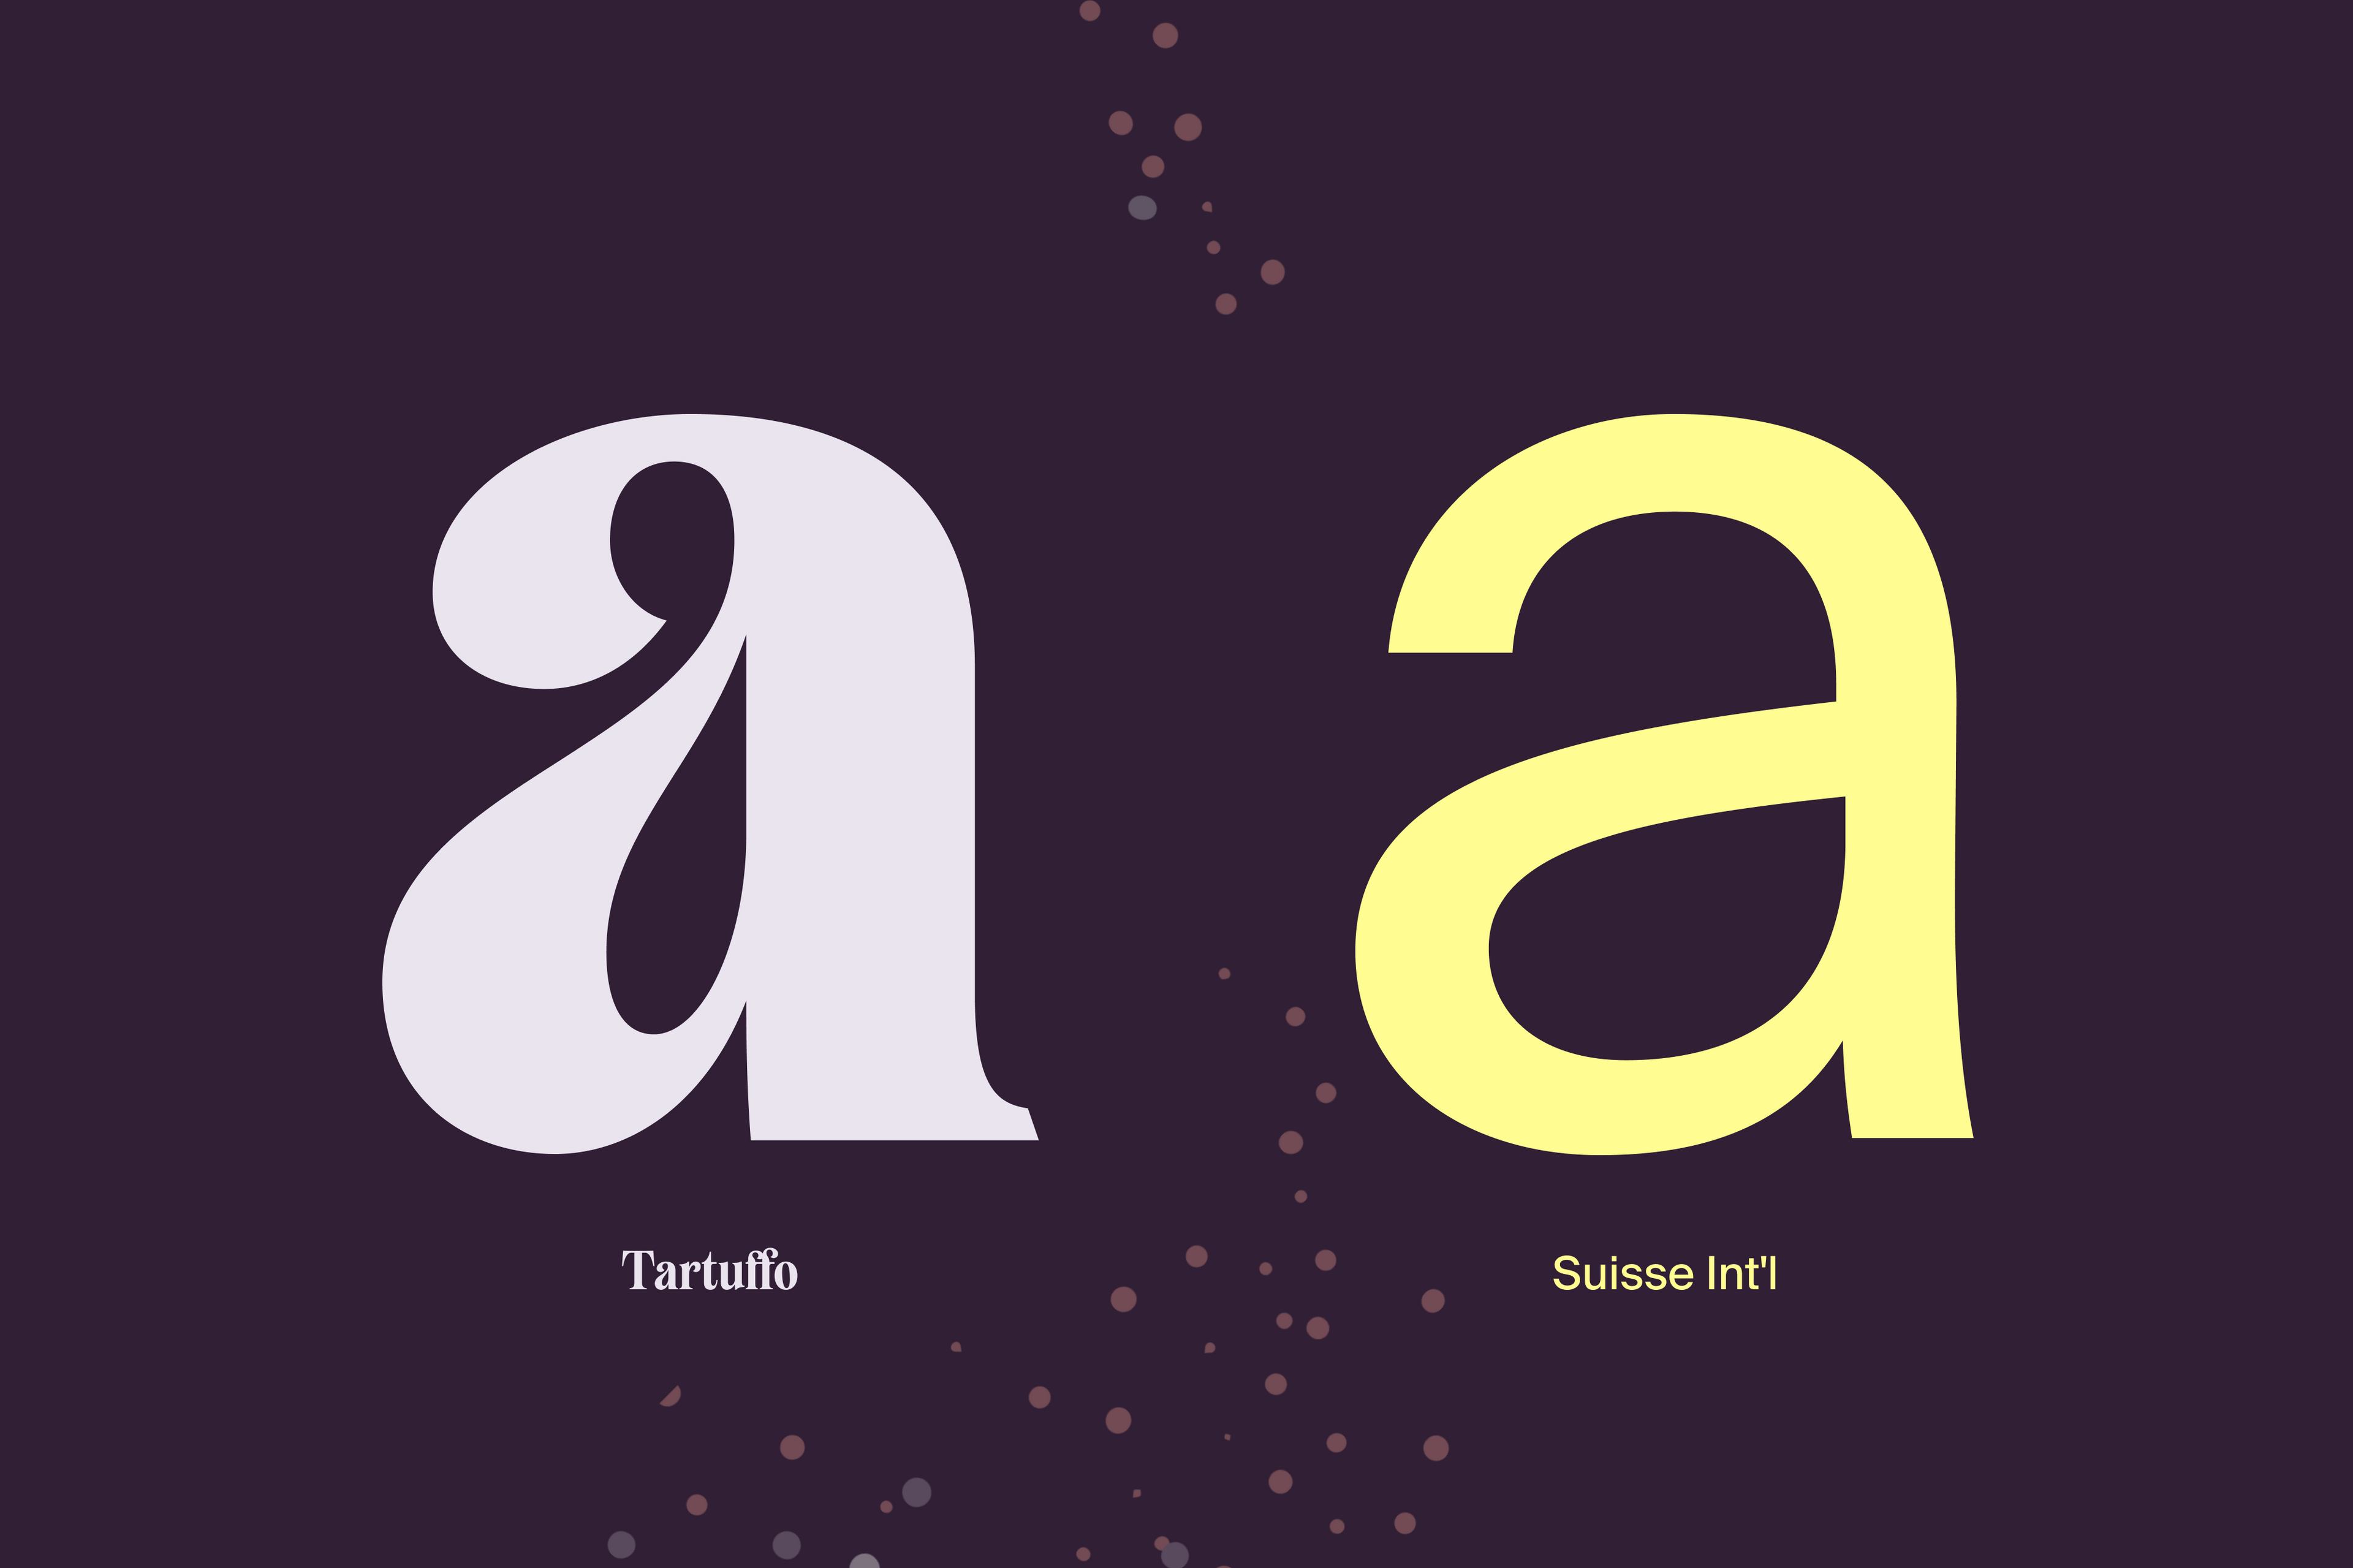 Two typefaces: Tartuffo and Suisse Int'l